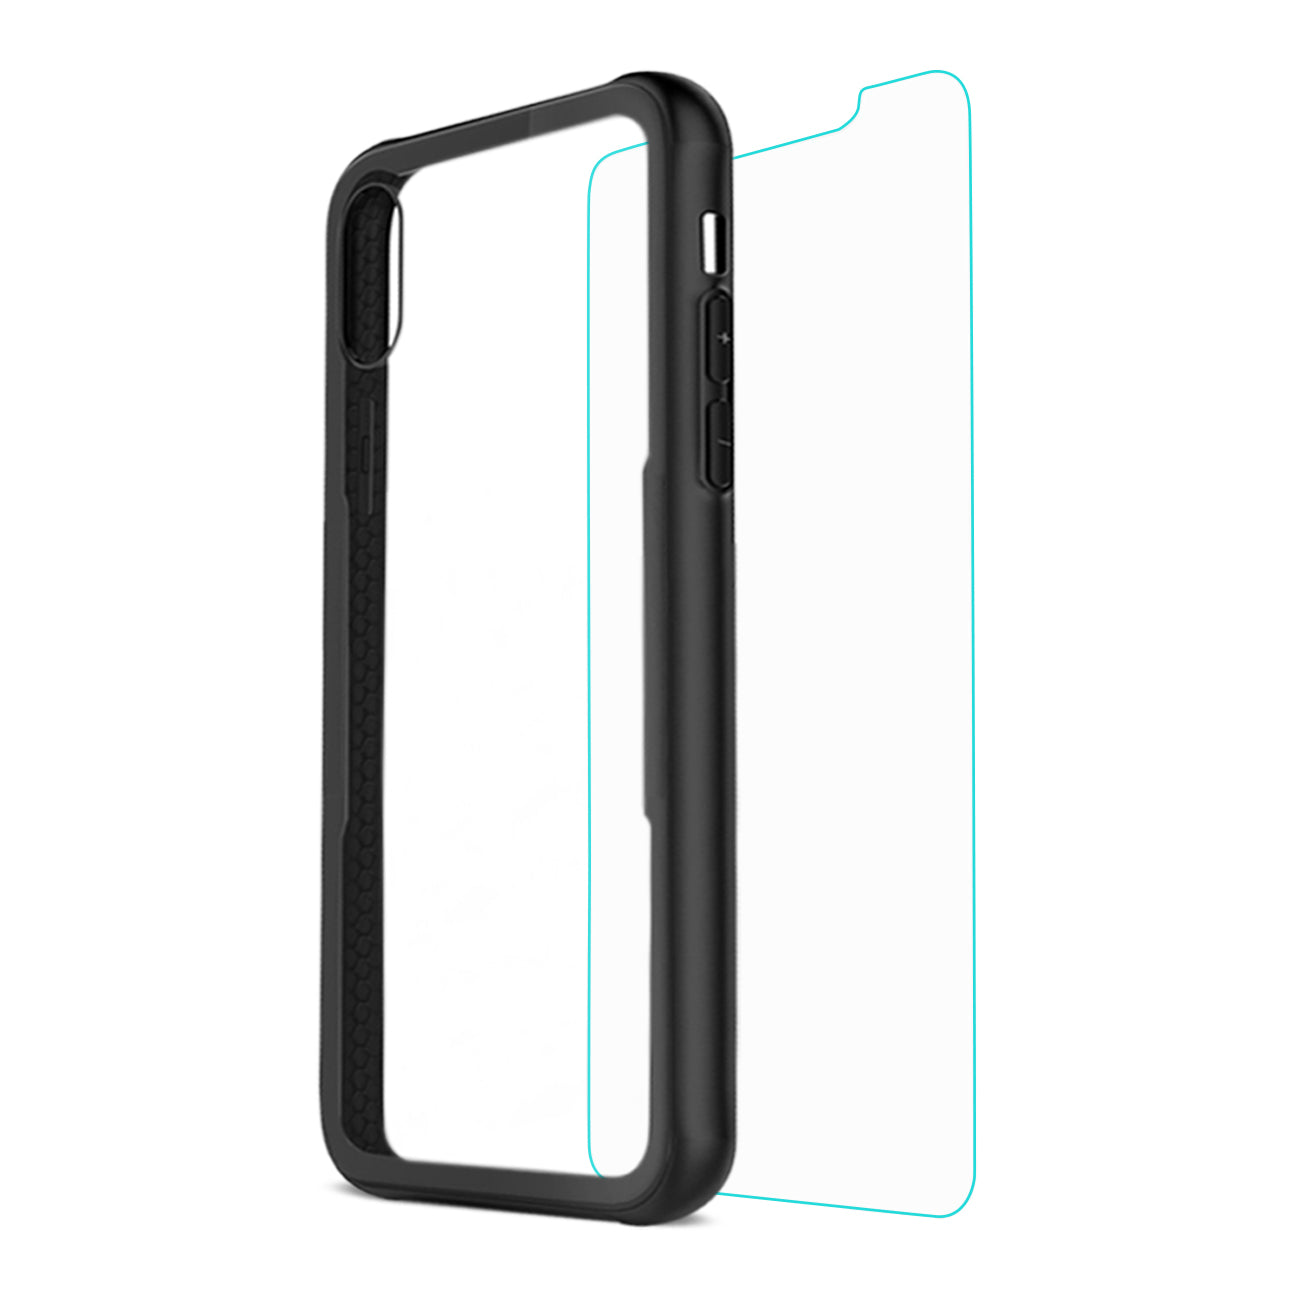 Reiko iPhone X/iPhone XS Hard Glass TPU Case With Tempered Glass Screen Protector In Clear Black